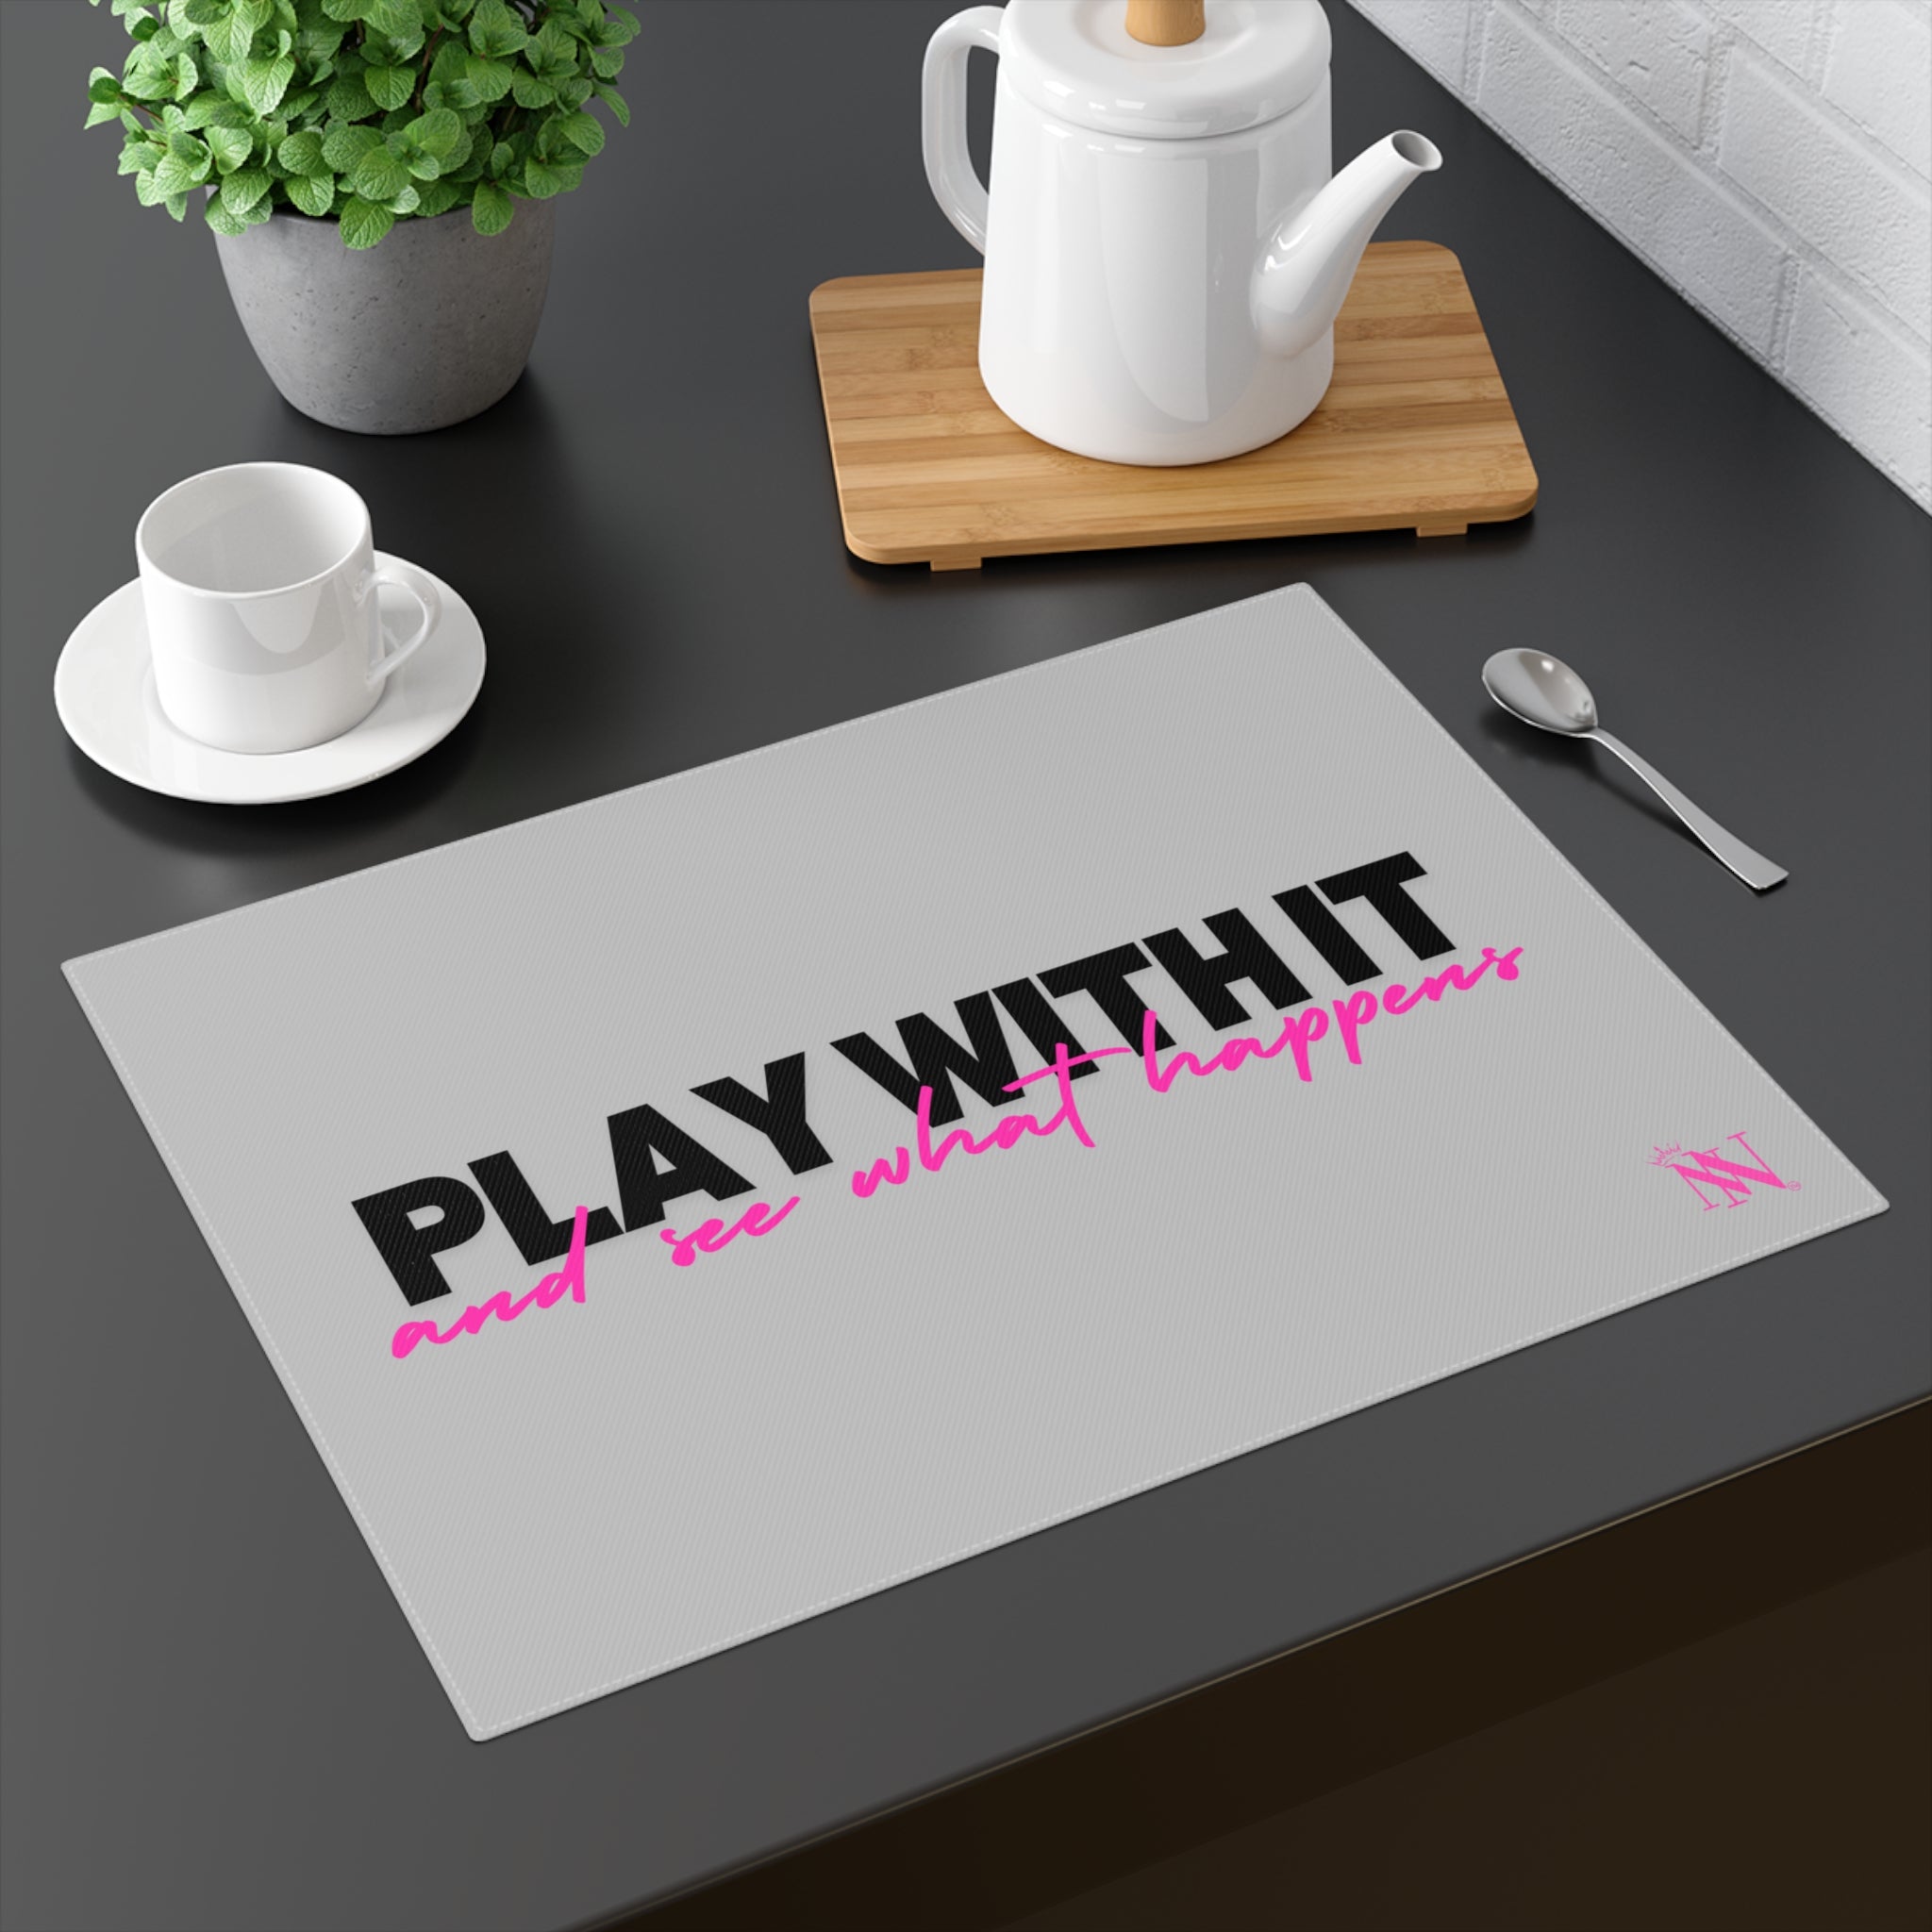 Play with it love toys mat